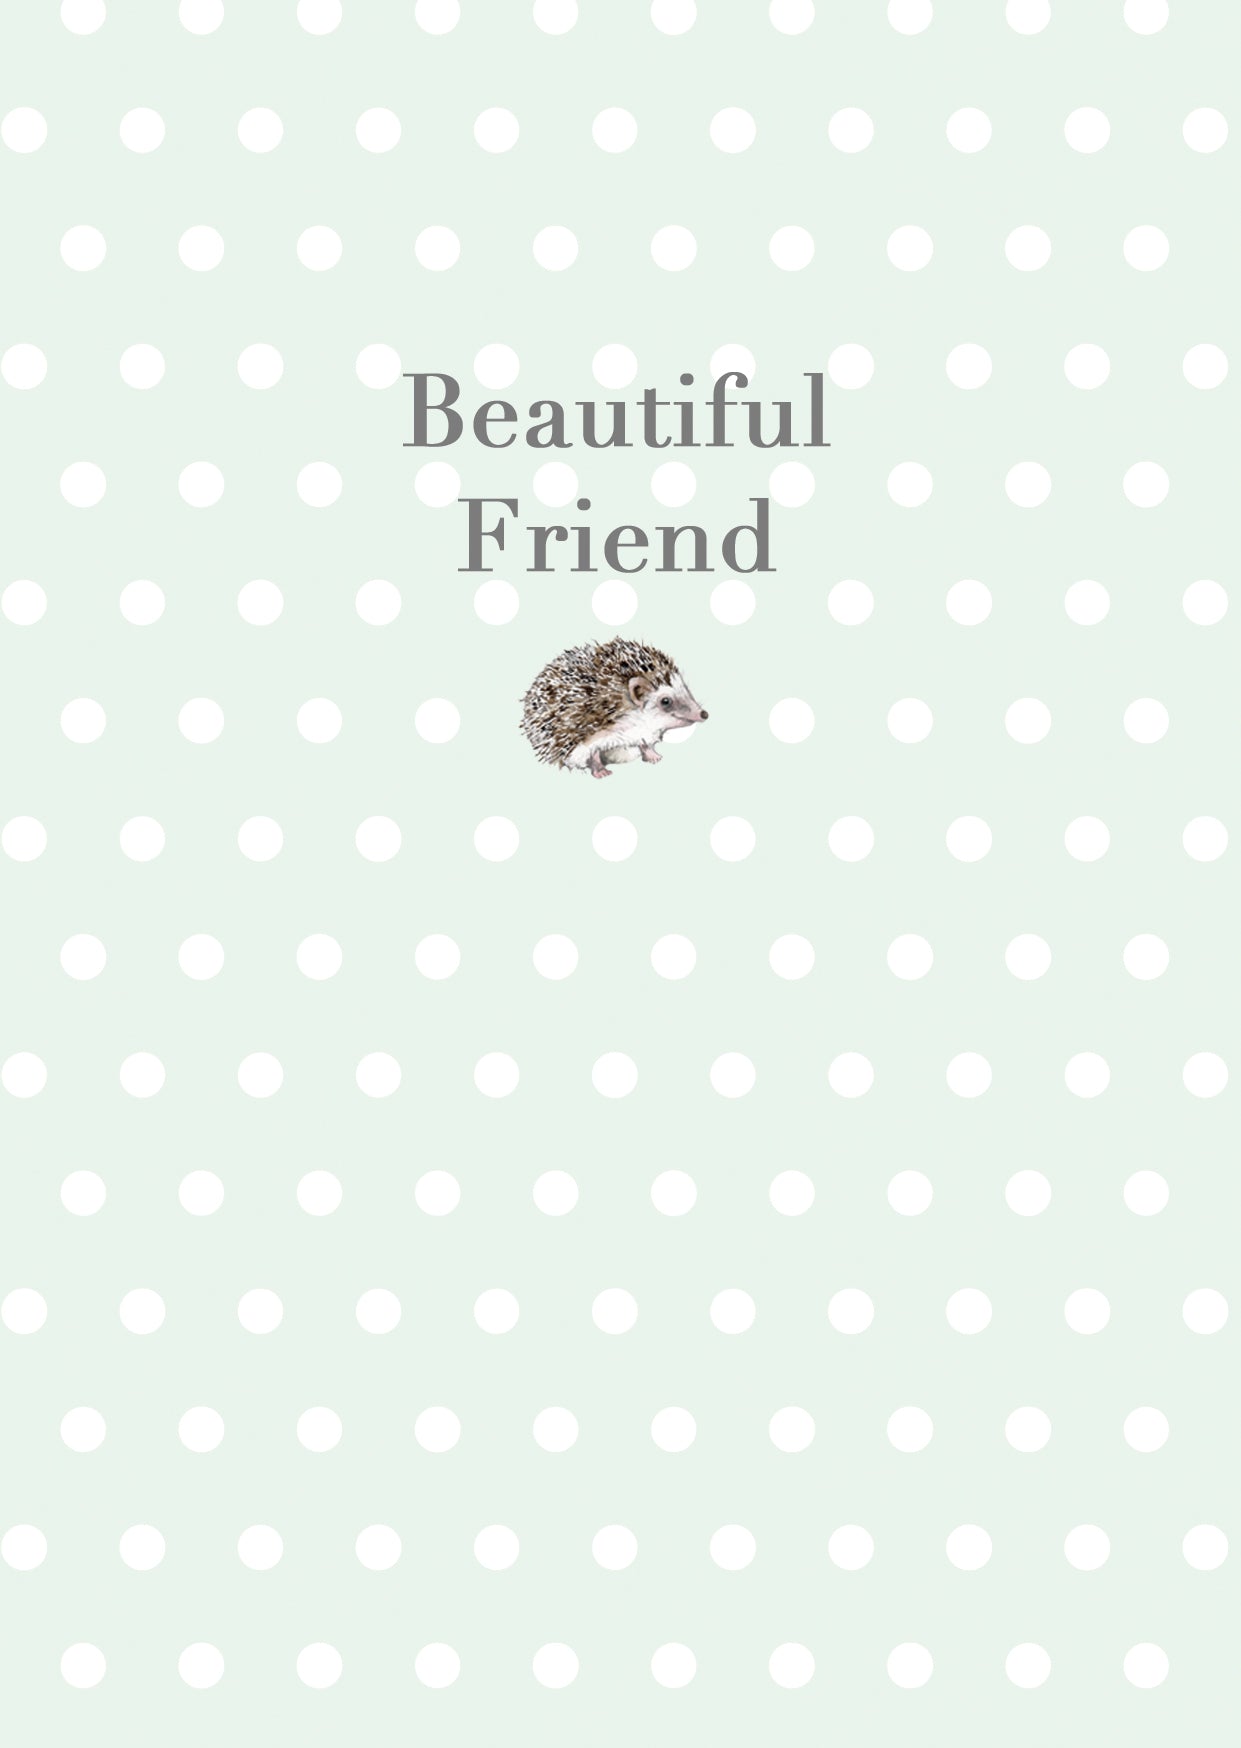 A6 Greeting Card with Ceramic Keepsake - Hedgehog Beautiful Friend Greeting & Note Cards Crumble and Core   